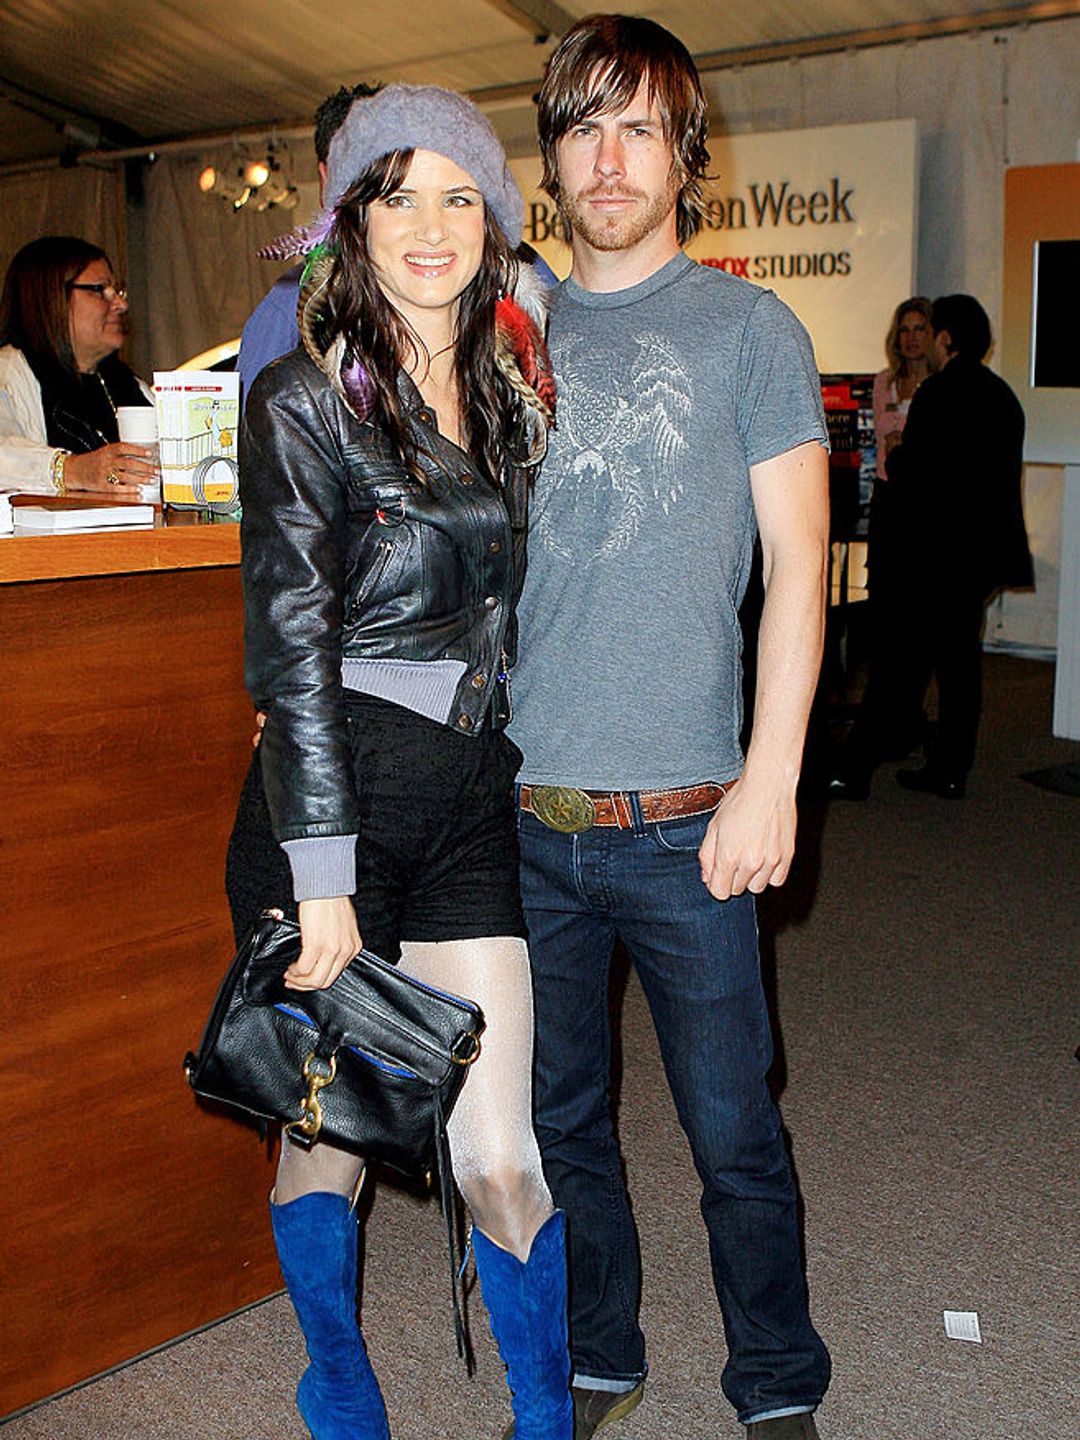 Juliette Lewis and Steve Berra. She is wearing a leather jacket and shorts, while he is dressed in a grey T-shirt and jeans